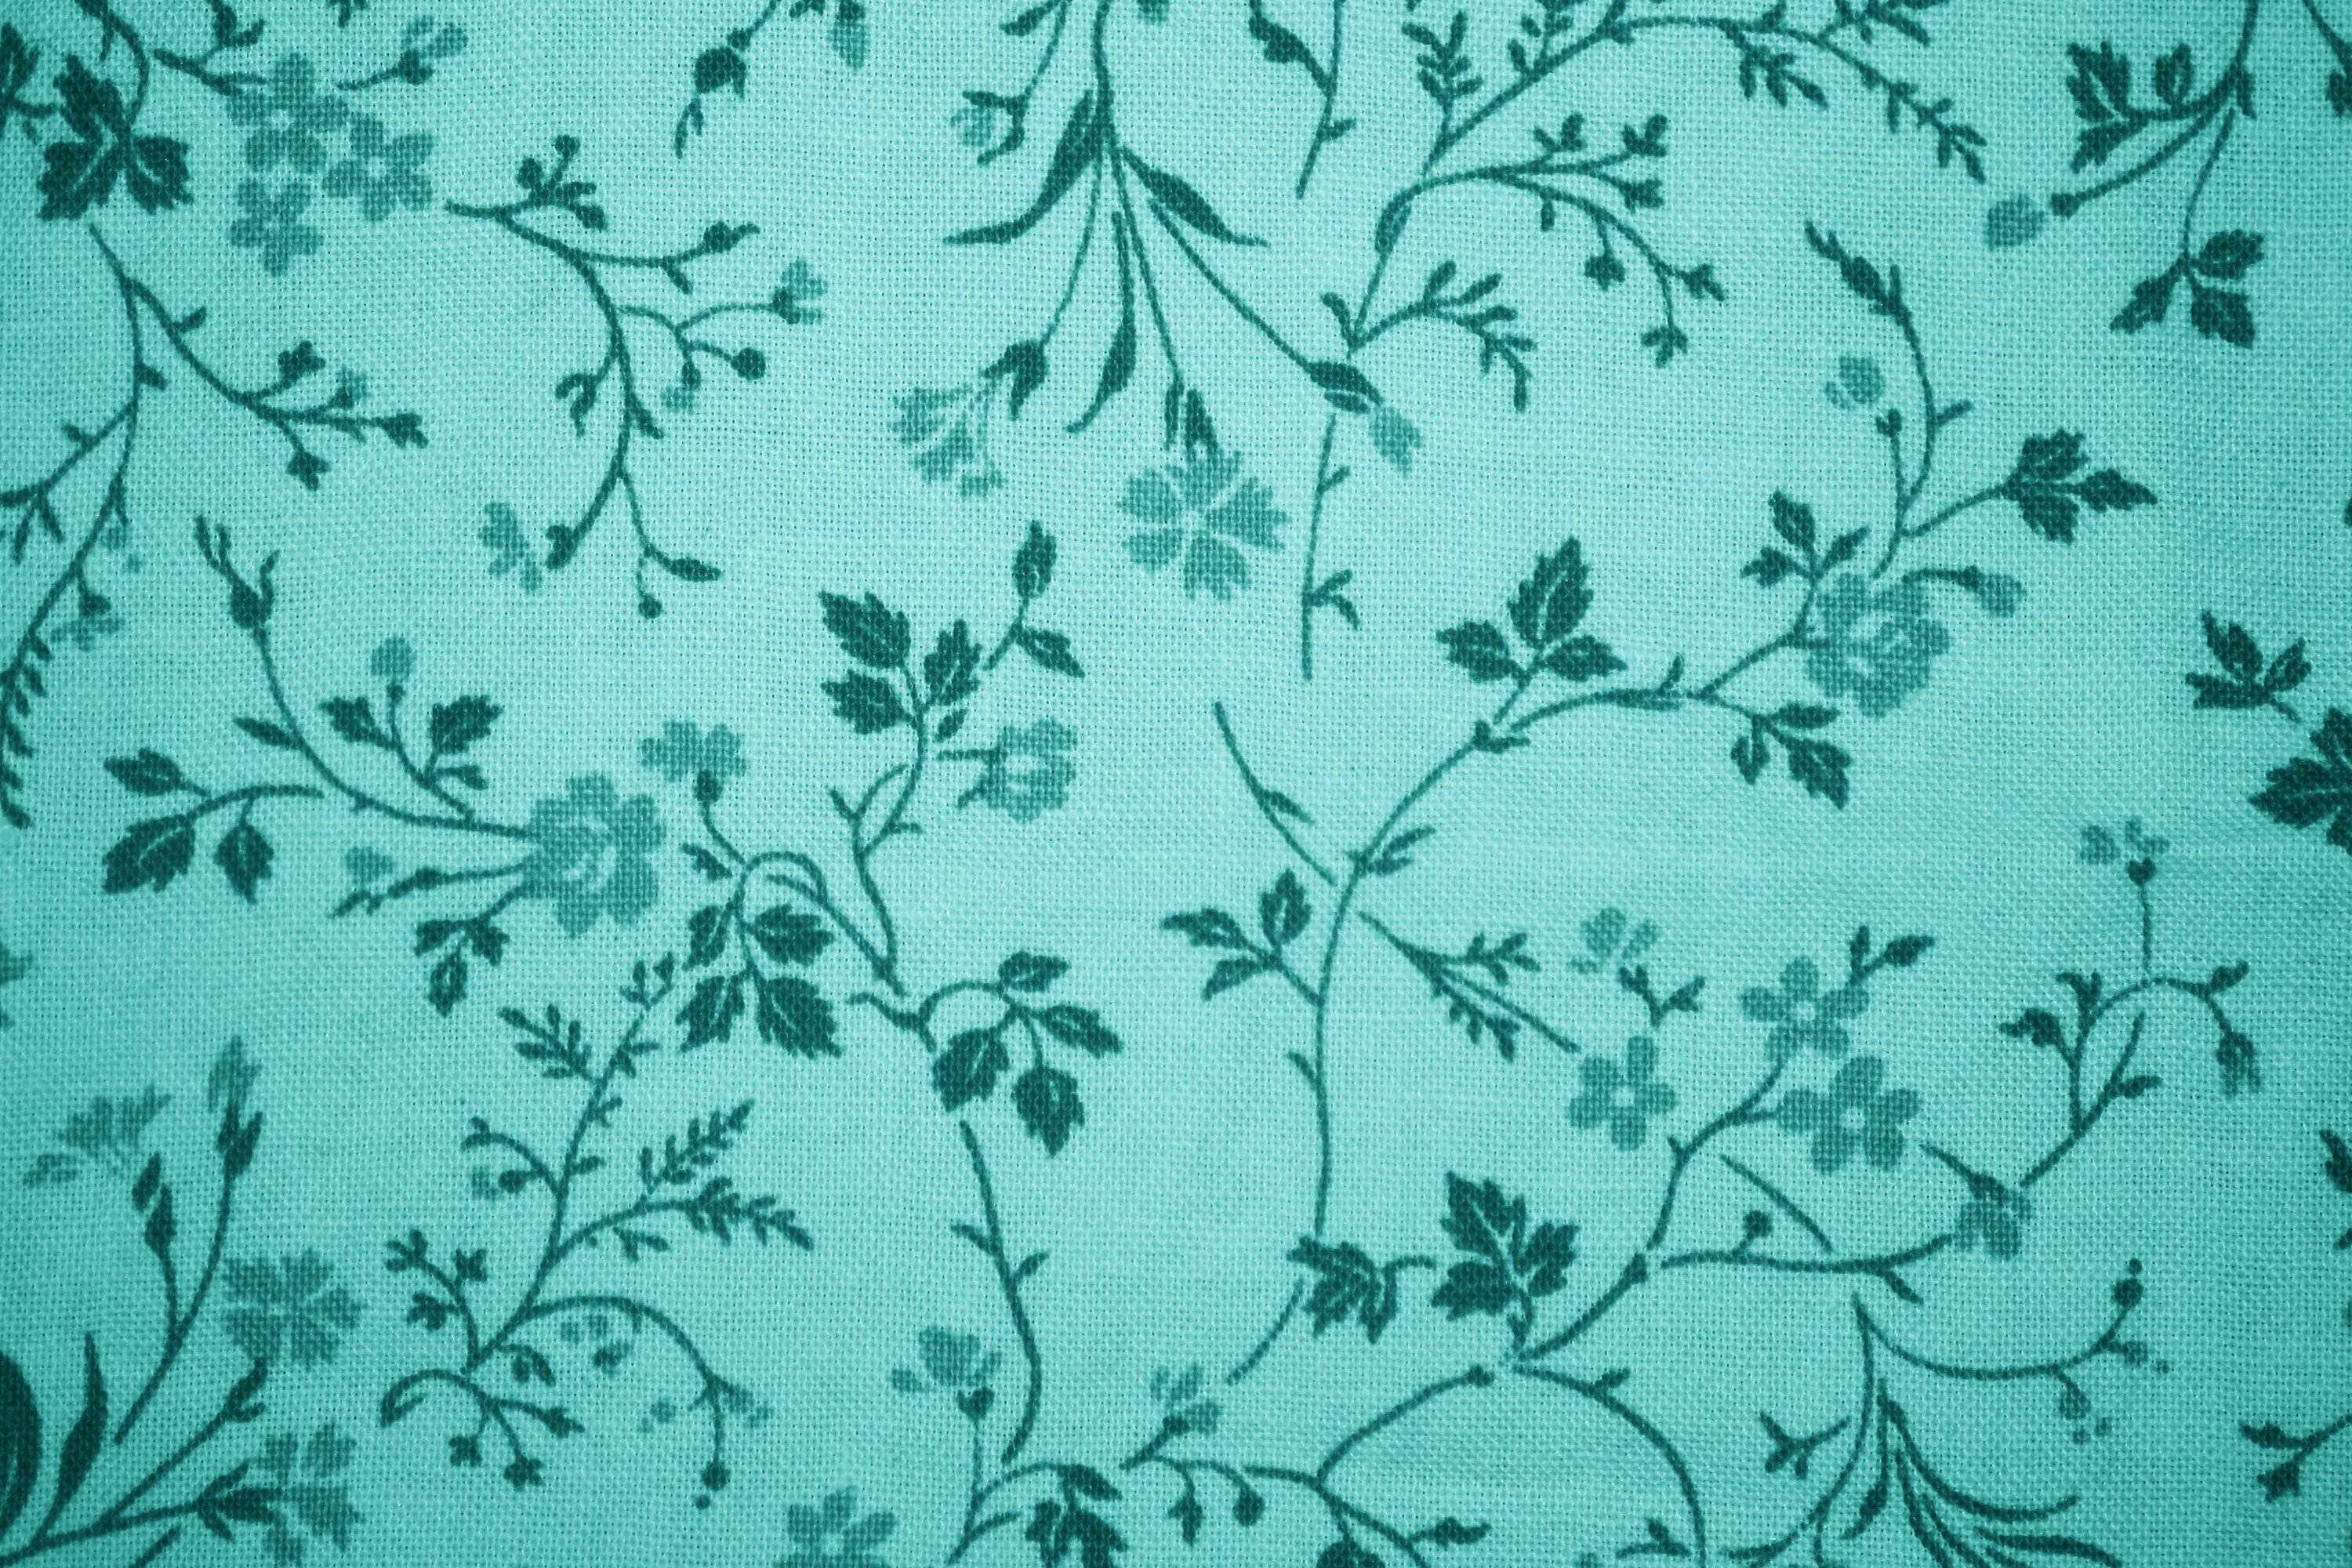 Teal Floral Print Fabric Texture Picture | Free Photograph ...